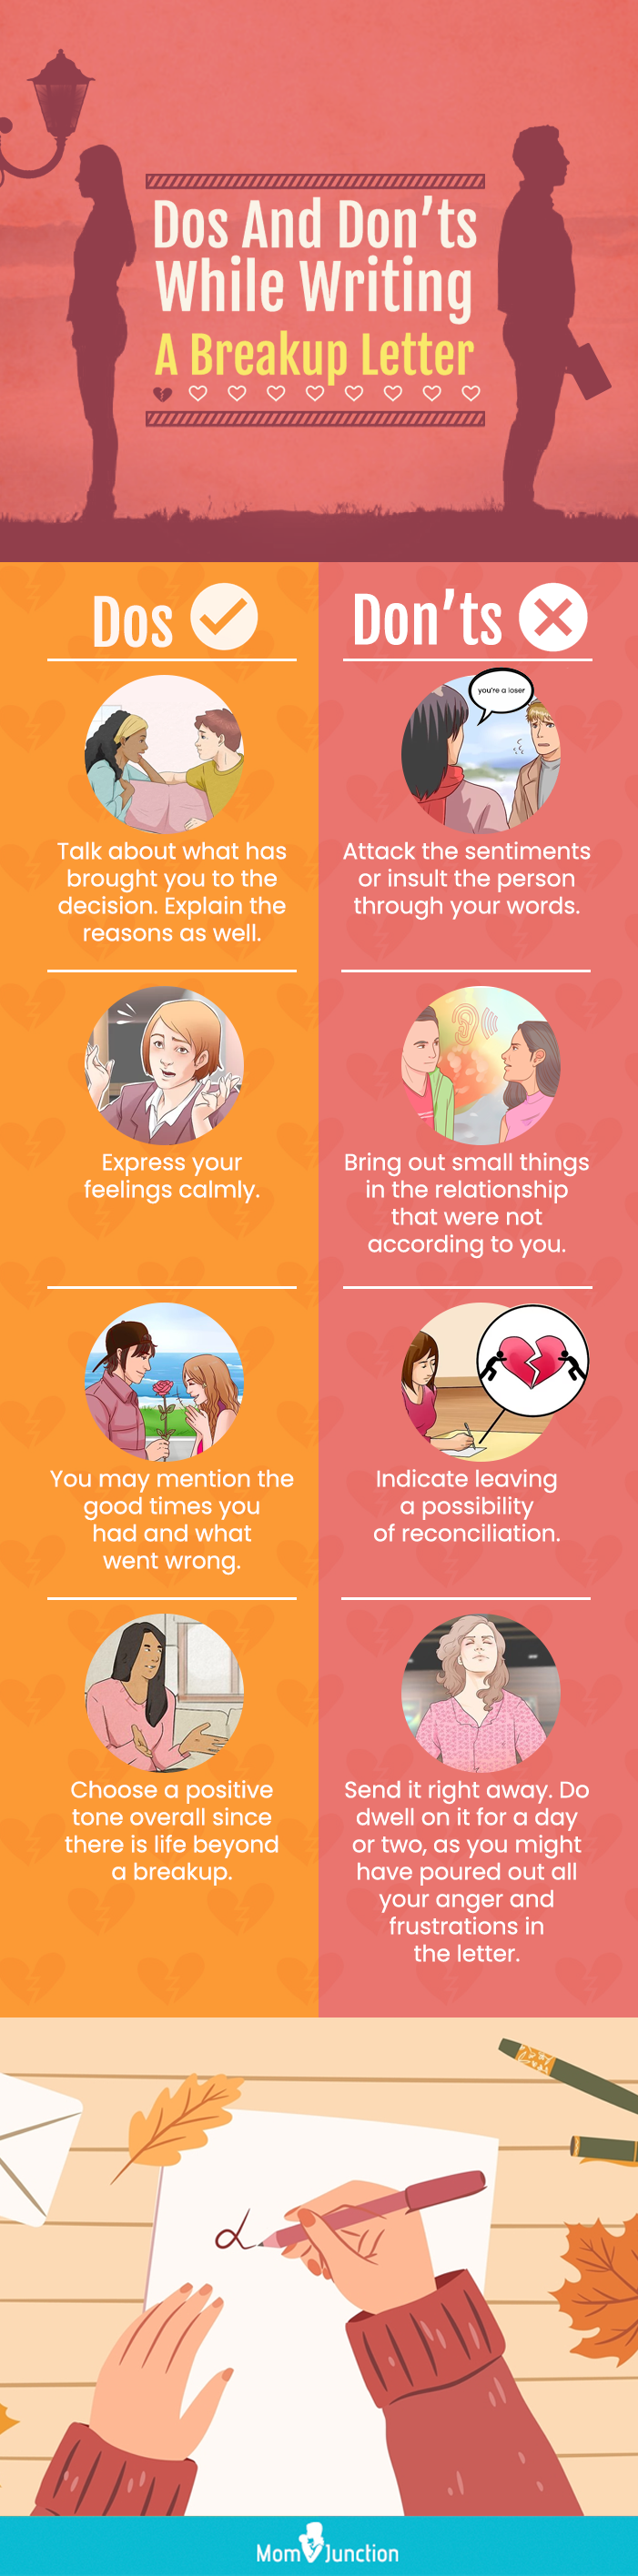 do and dont on a breakup letter (infographic)